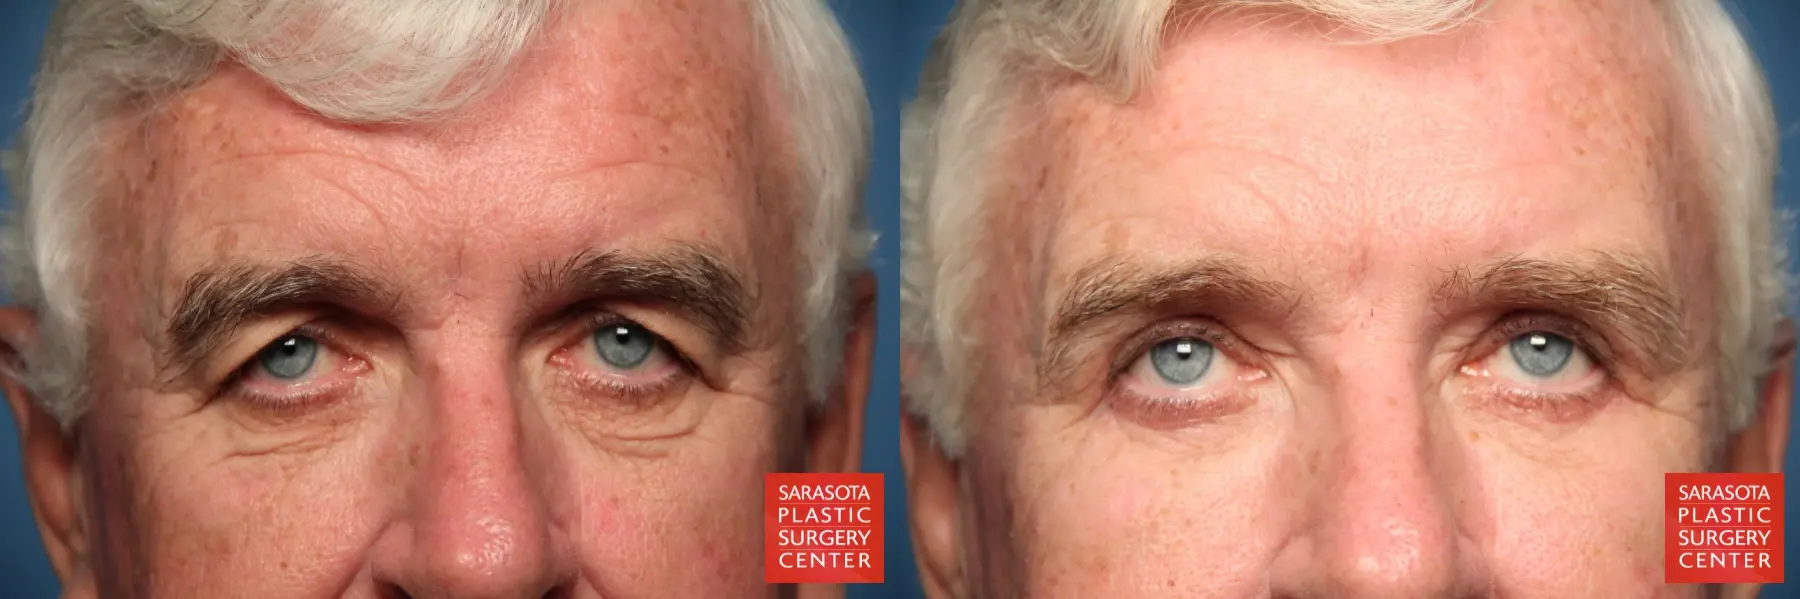 Eyelid Lift For Men: Patient 1 - Before and After 4